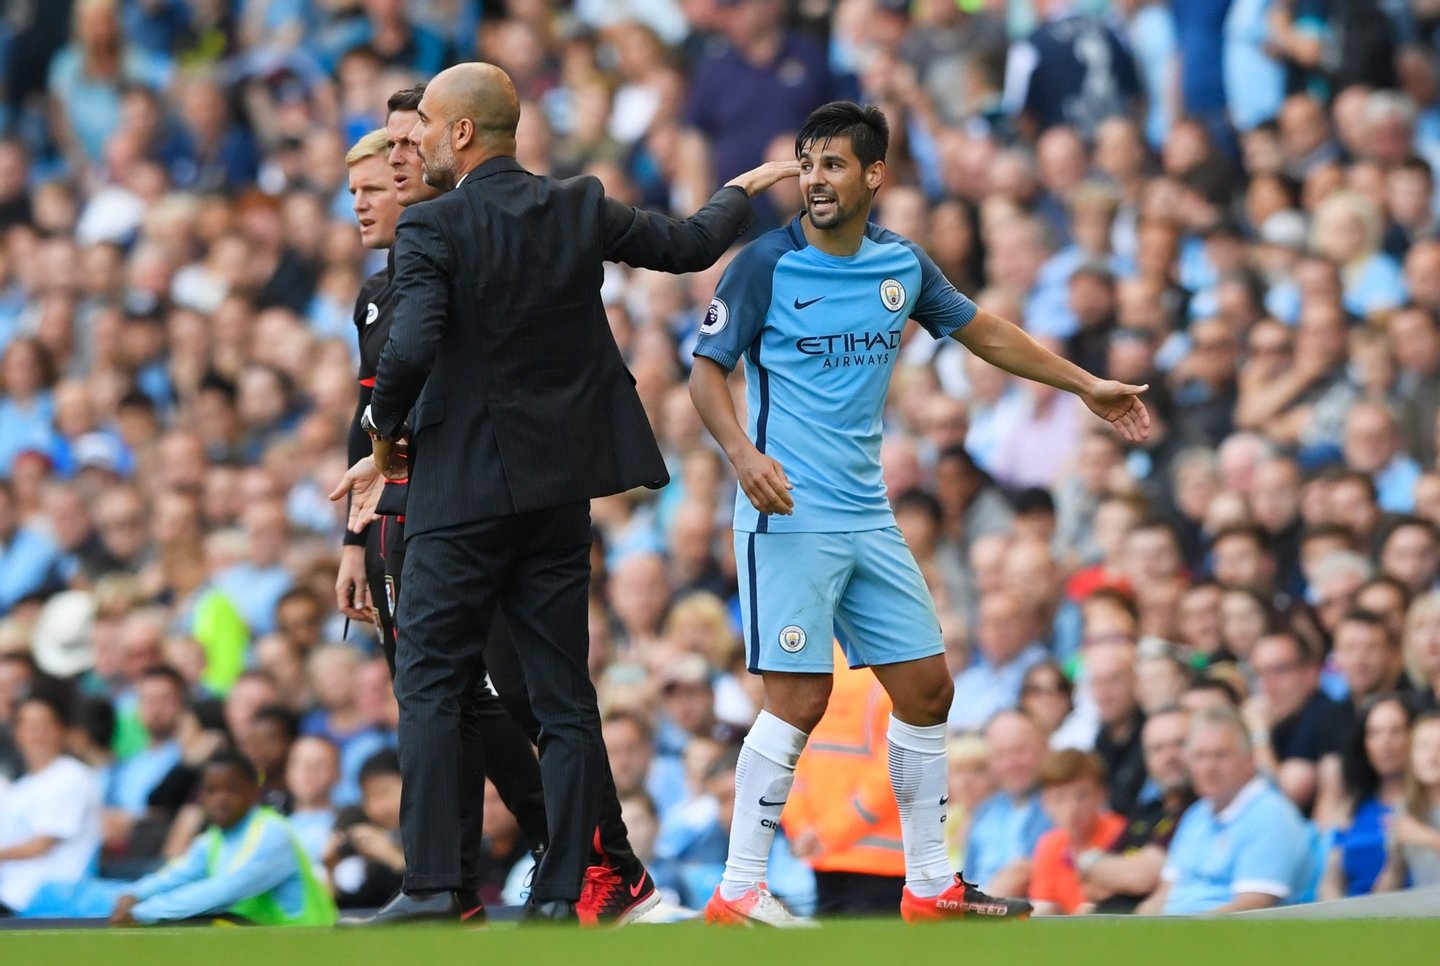 MANCHESTER, ENGLAND - SEPTEMBER 17: Josep Guardiola, Manager of Manchester City reacts to Nolito of Manchester City getting sent off during the Premier League match between Manchester City and AFC Bournemouth at the Etihad Stadium on September 17, 2016 in Manchester, England. (Photo by Stu Forster/Getty Images)